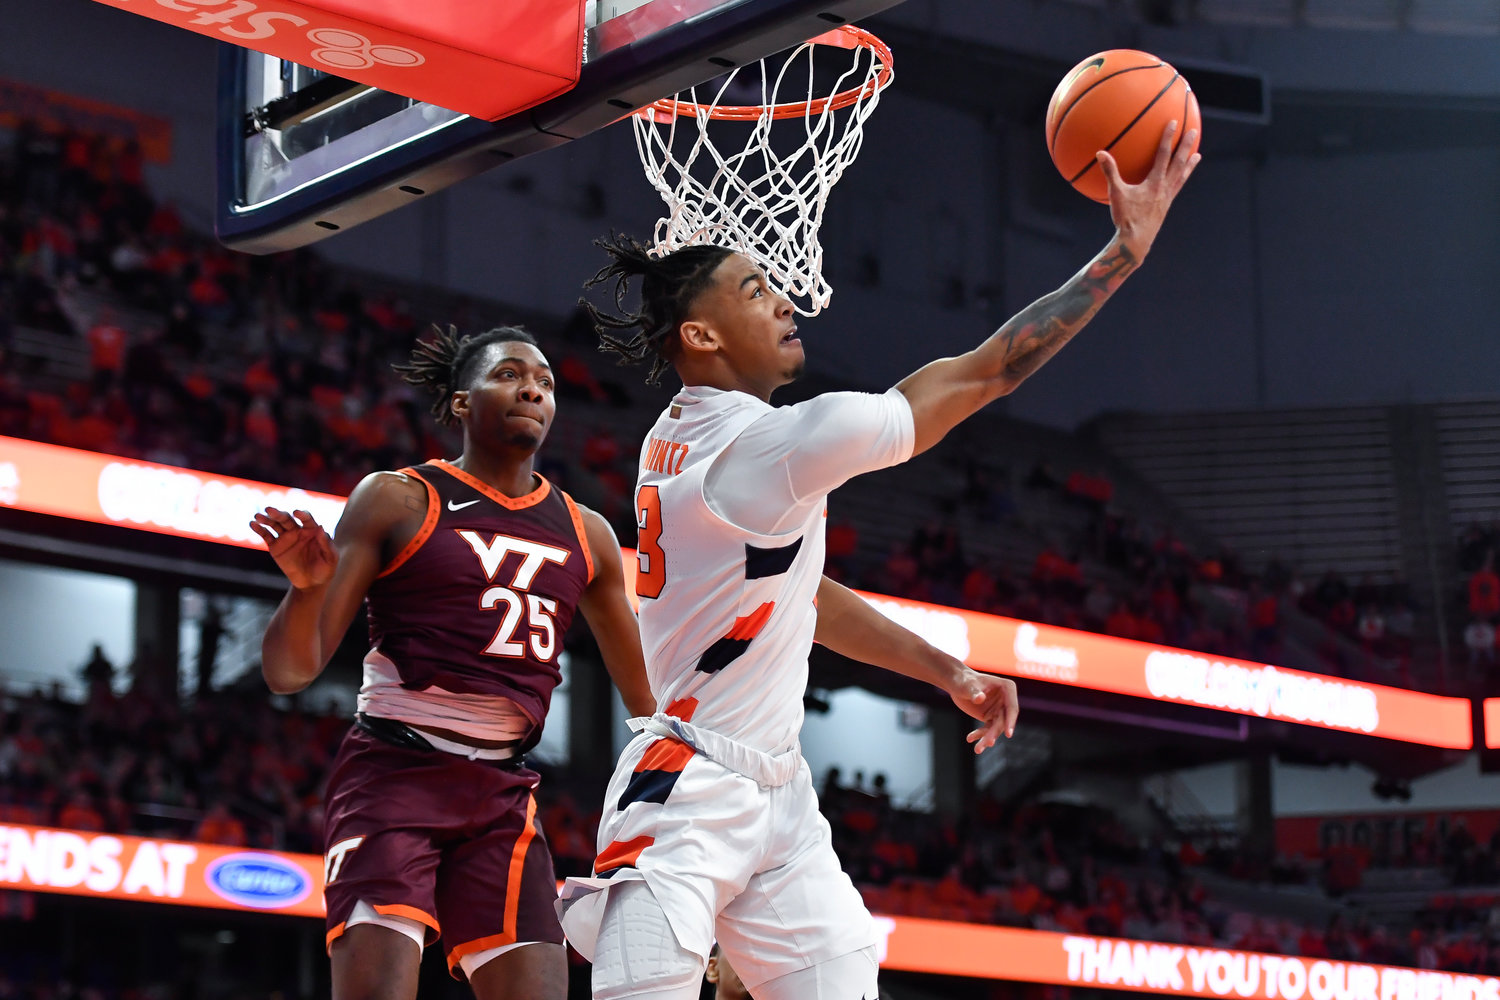 Syracuse guard Judah Mintz shoots against Virginia Tech forward Justyn Mutts during the second half of Wednesday night's game in Syracuse. The Orange won 82-72.